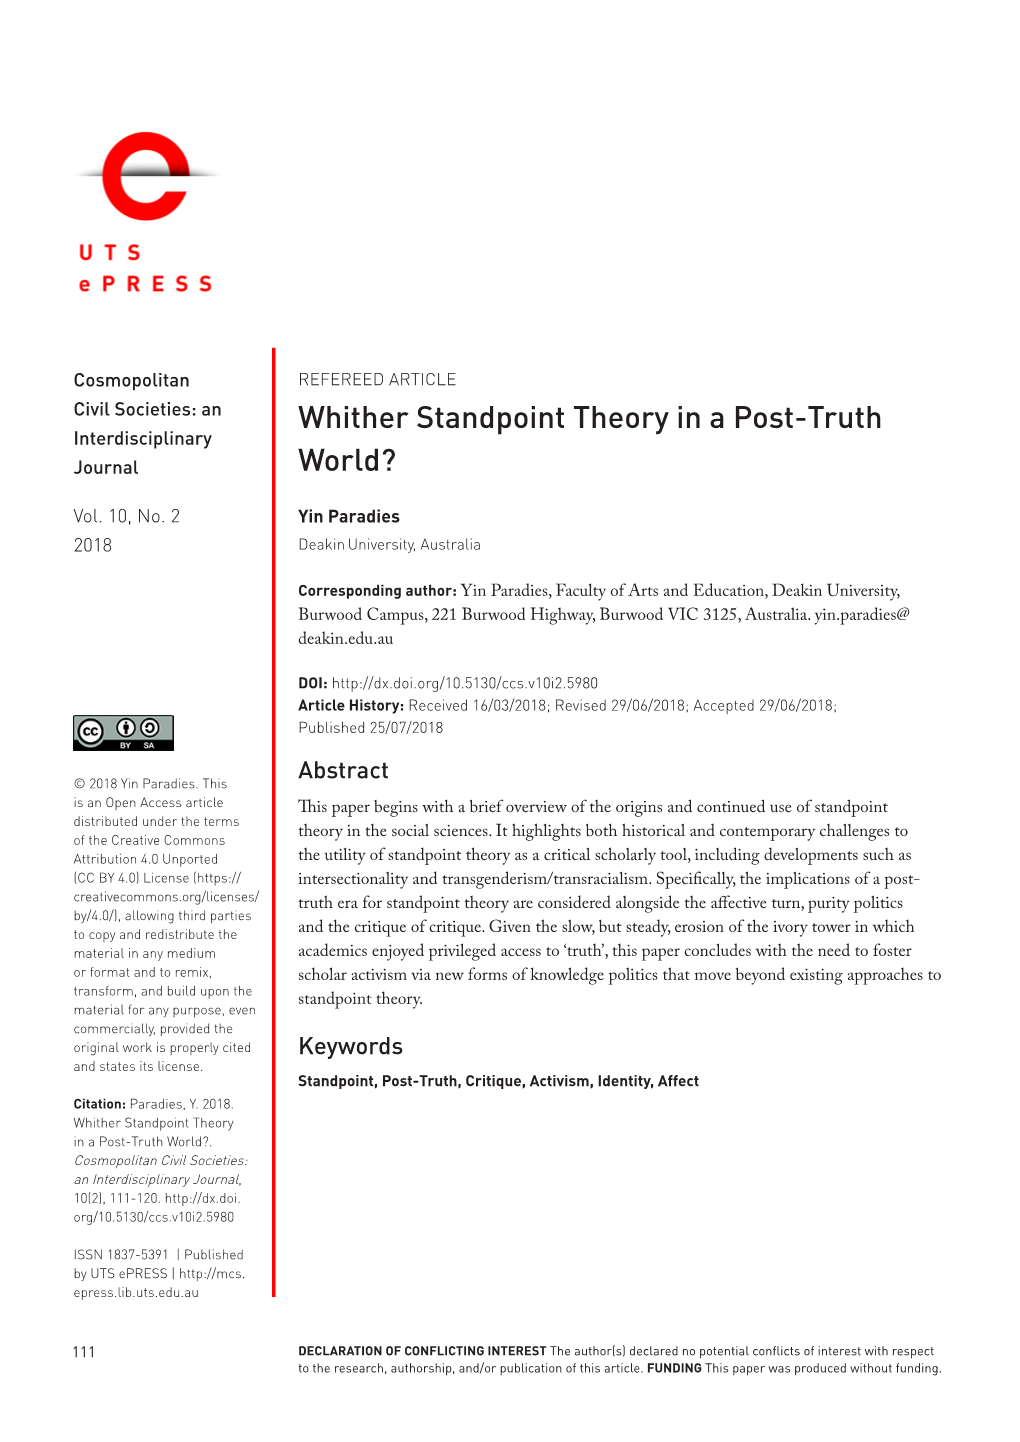 Whither Standpoint Theory in a Post-Truth World?